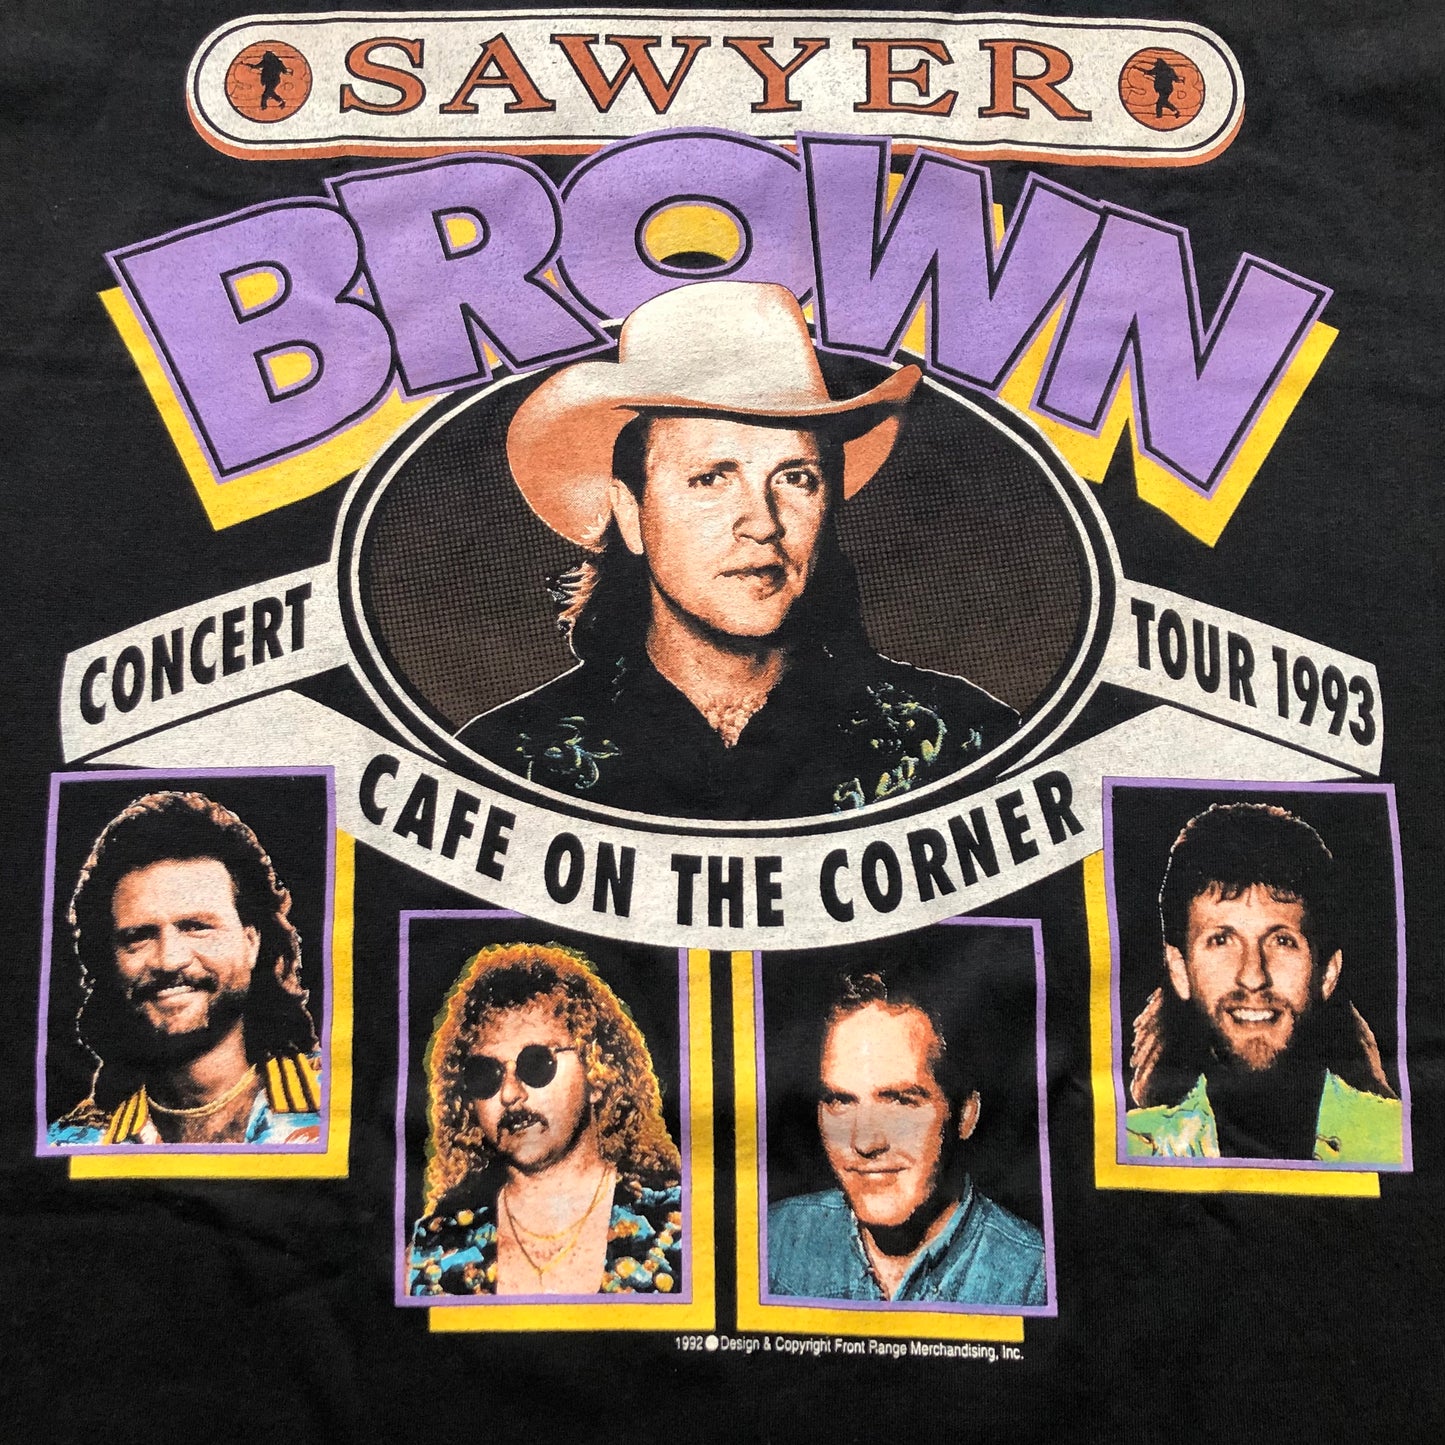 93’ Vintage Sawyer Brown “Cafe On The Corner” Country Concert T-shirt | Deadstock